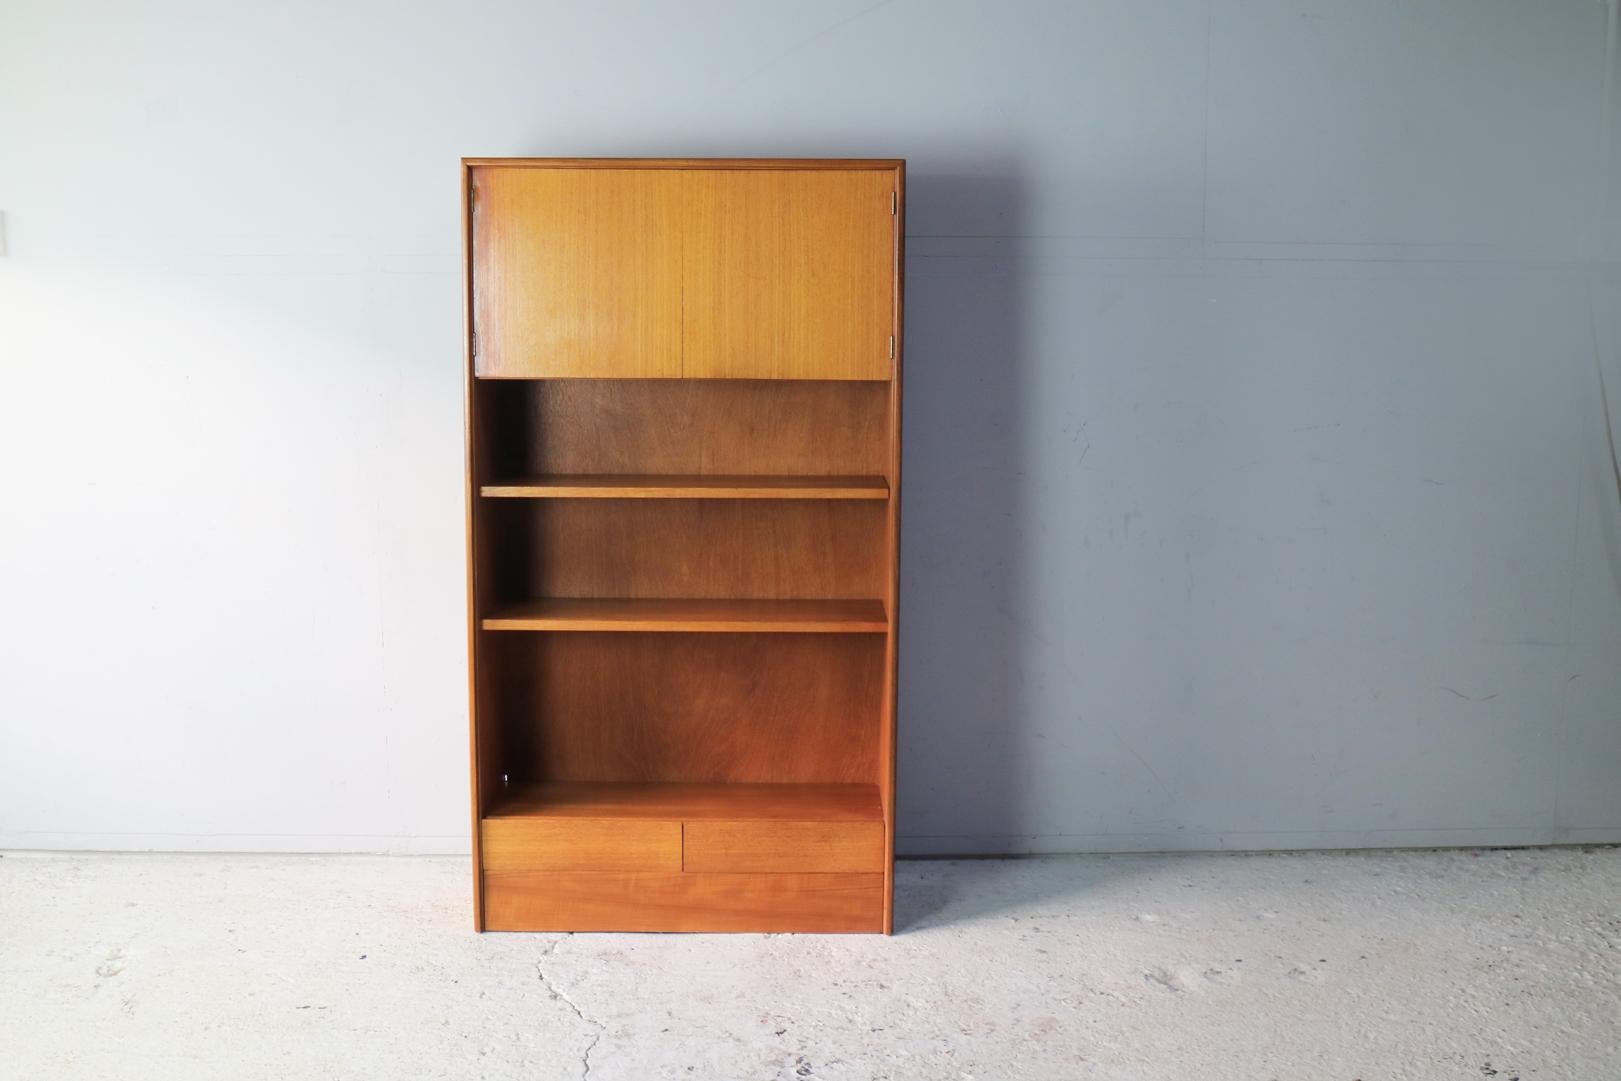 Rare book shelf or storage unit by G Plan. Minimally designed with a Danish sensibility. Two cupboards at the top and 2 drawers at the bottom. Open book shelving in between. G Plan label on inside of cupboard door.
 